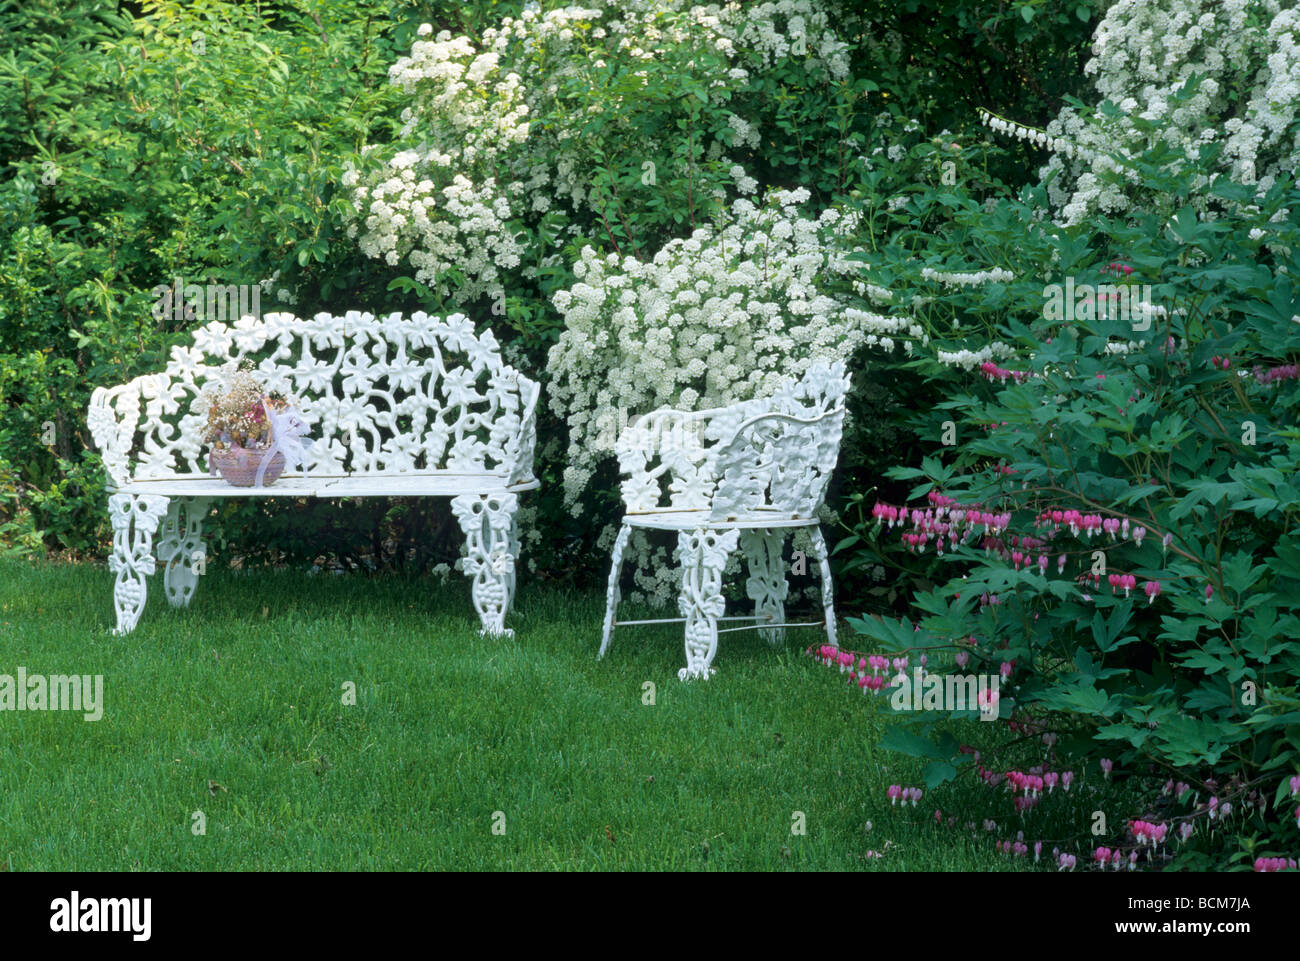 WHITE GARDEN IN RURAL MINNESOTA INCLUDES BRIDAL WREATH AND WHITE BLEEDING HEART AND VICTORIAN IRON FURNITURE.  JUNE Stock Photo